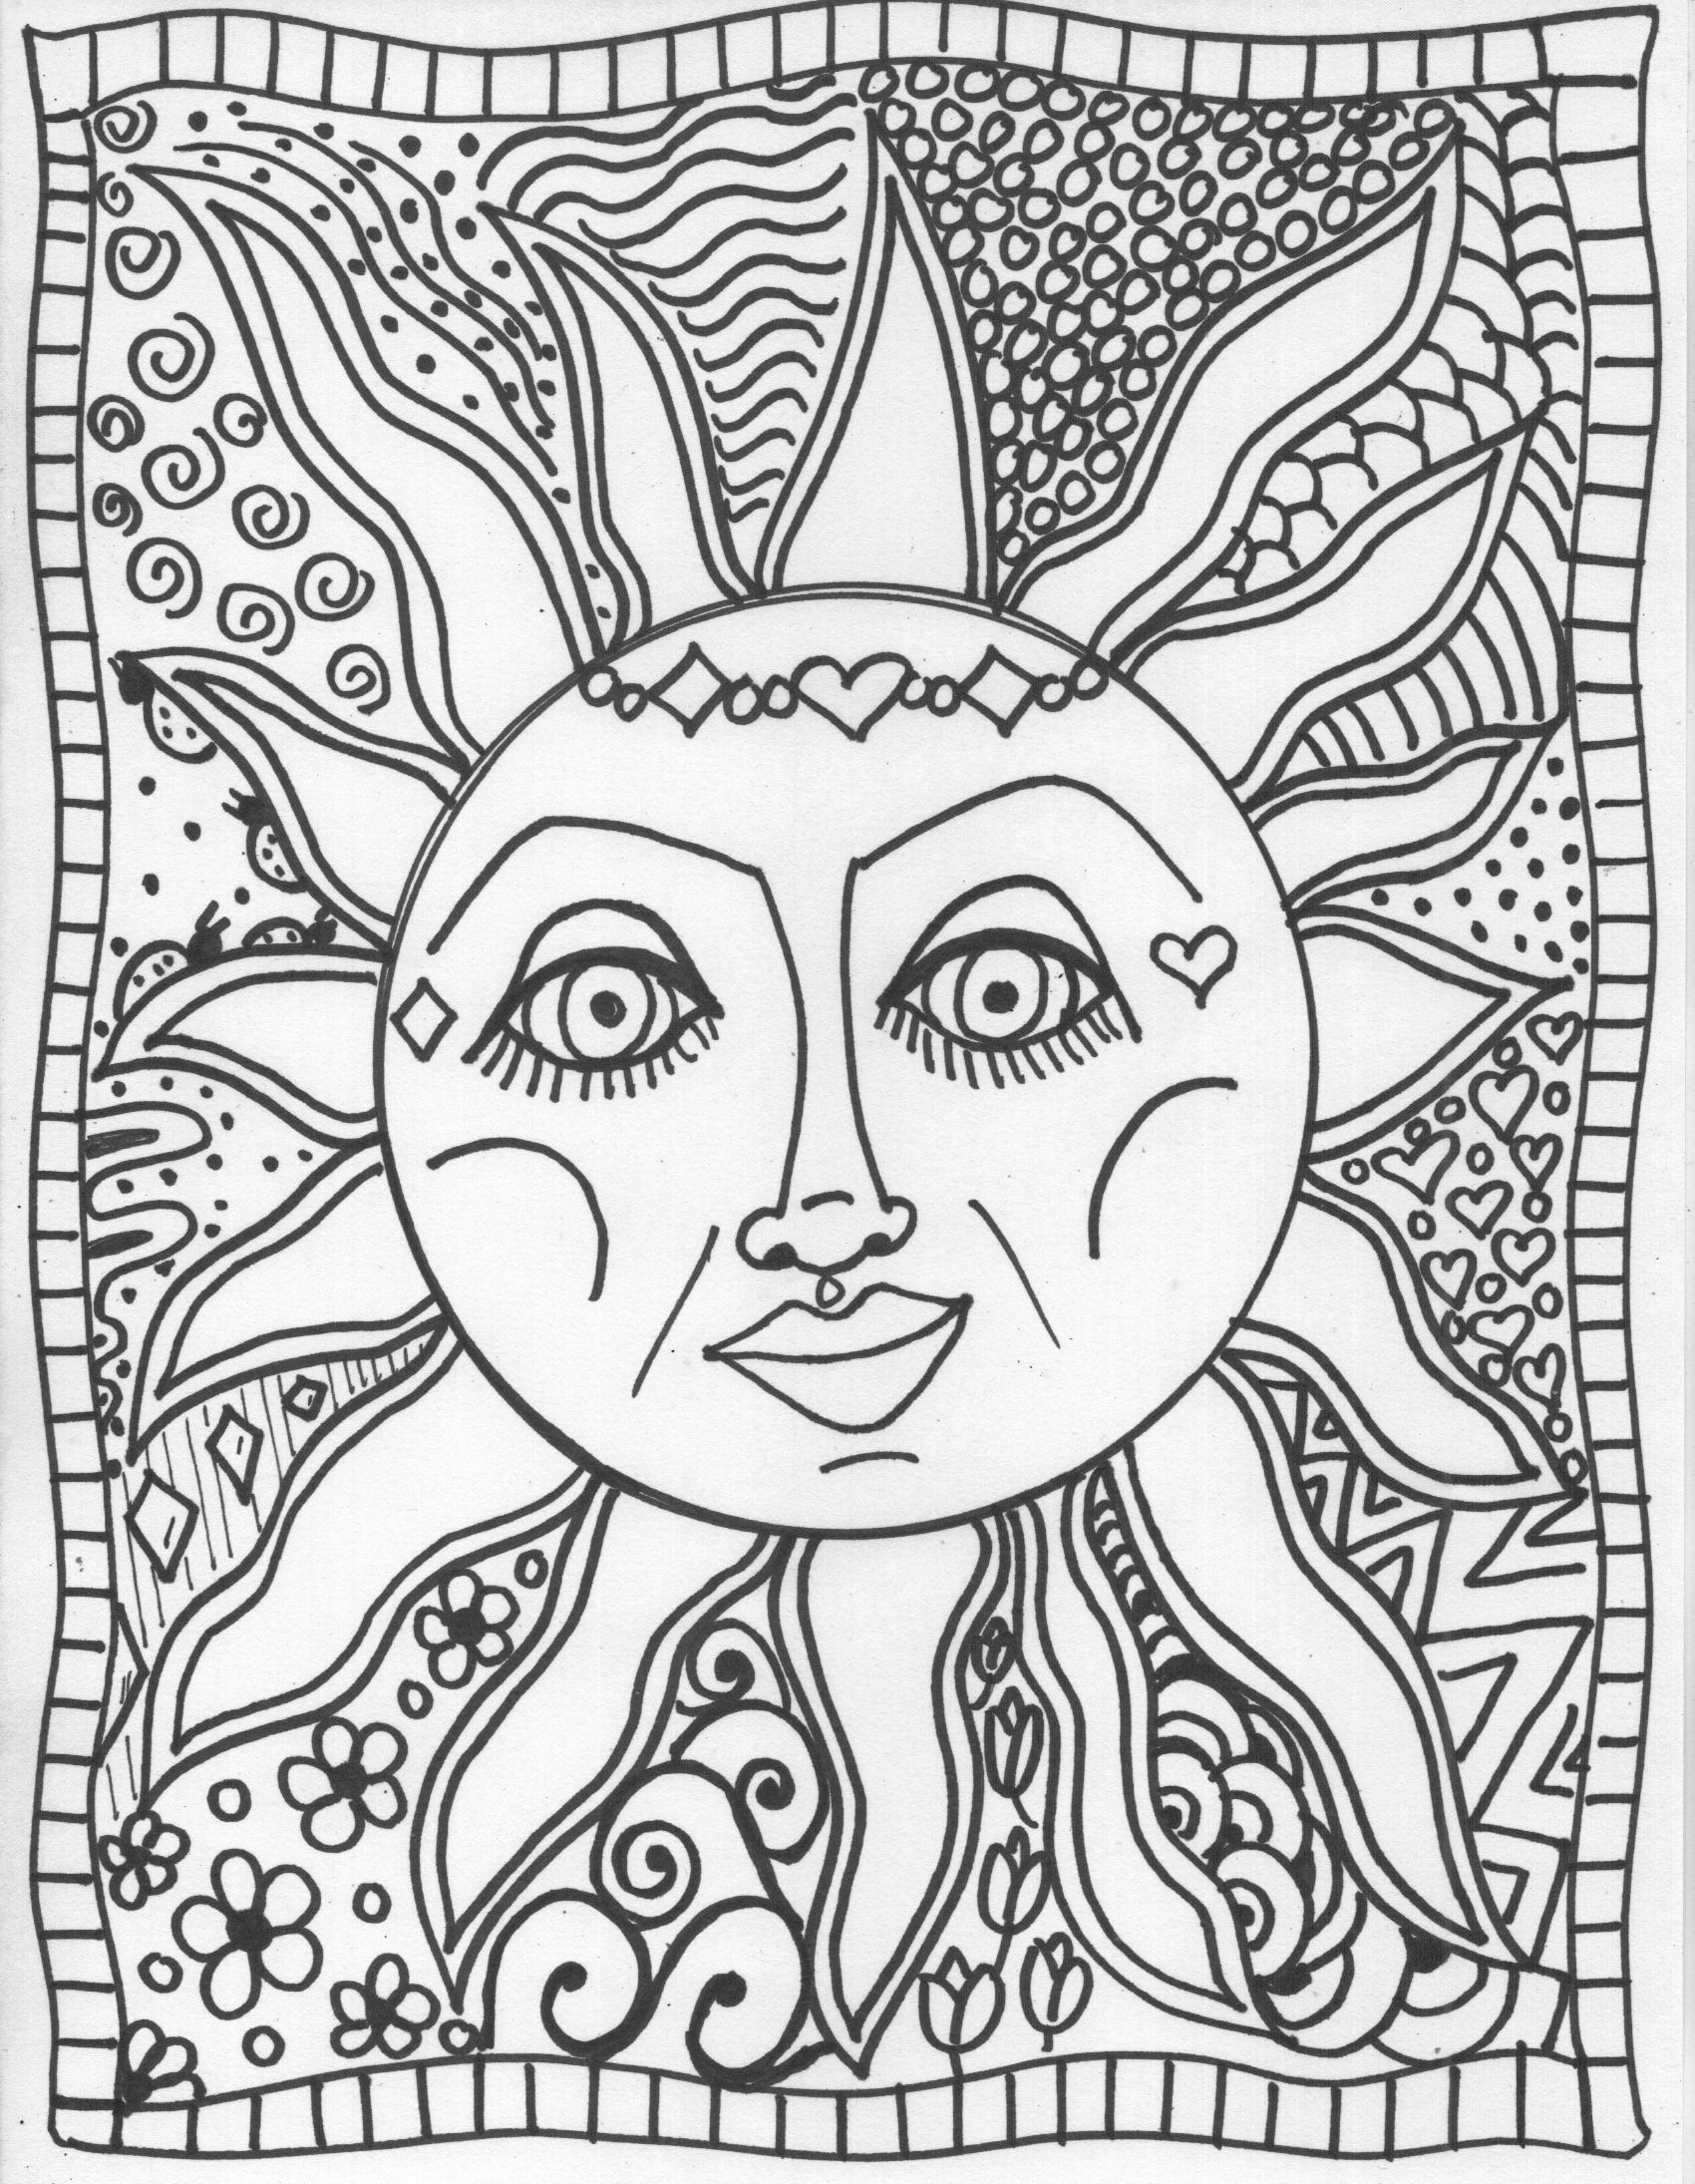 Trippy Coloring Pages To Print   Coloring Home